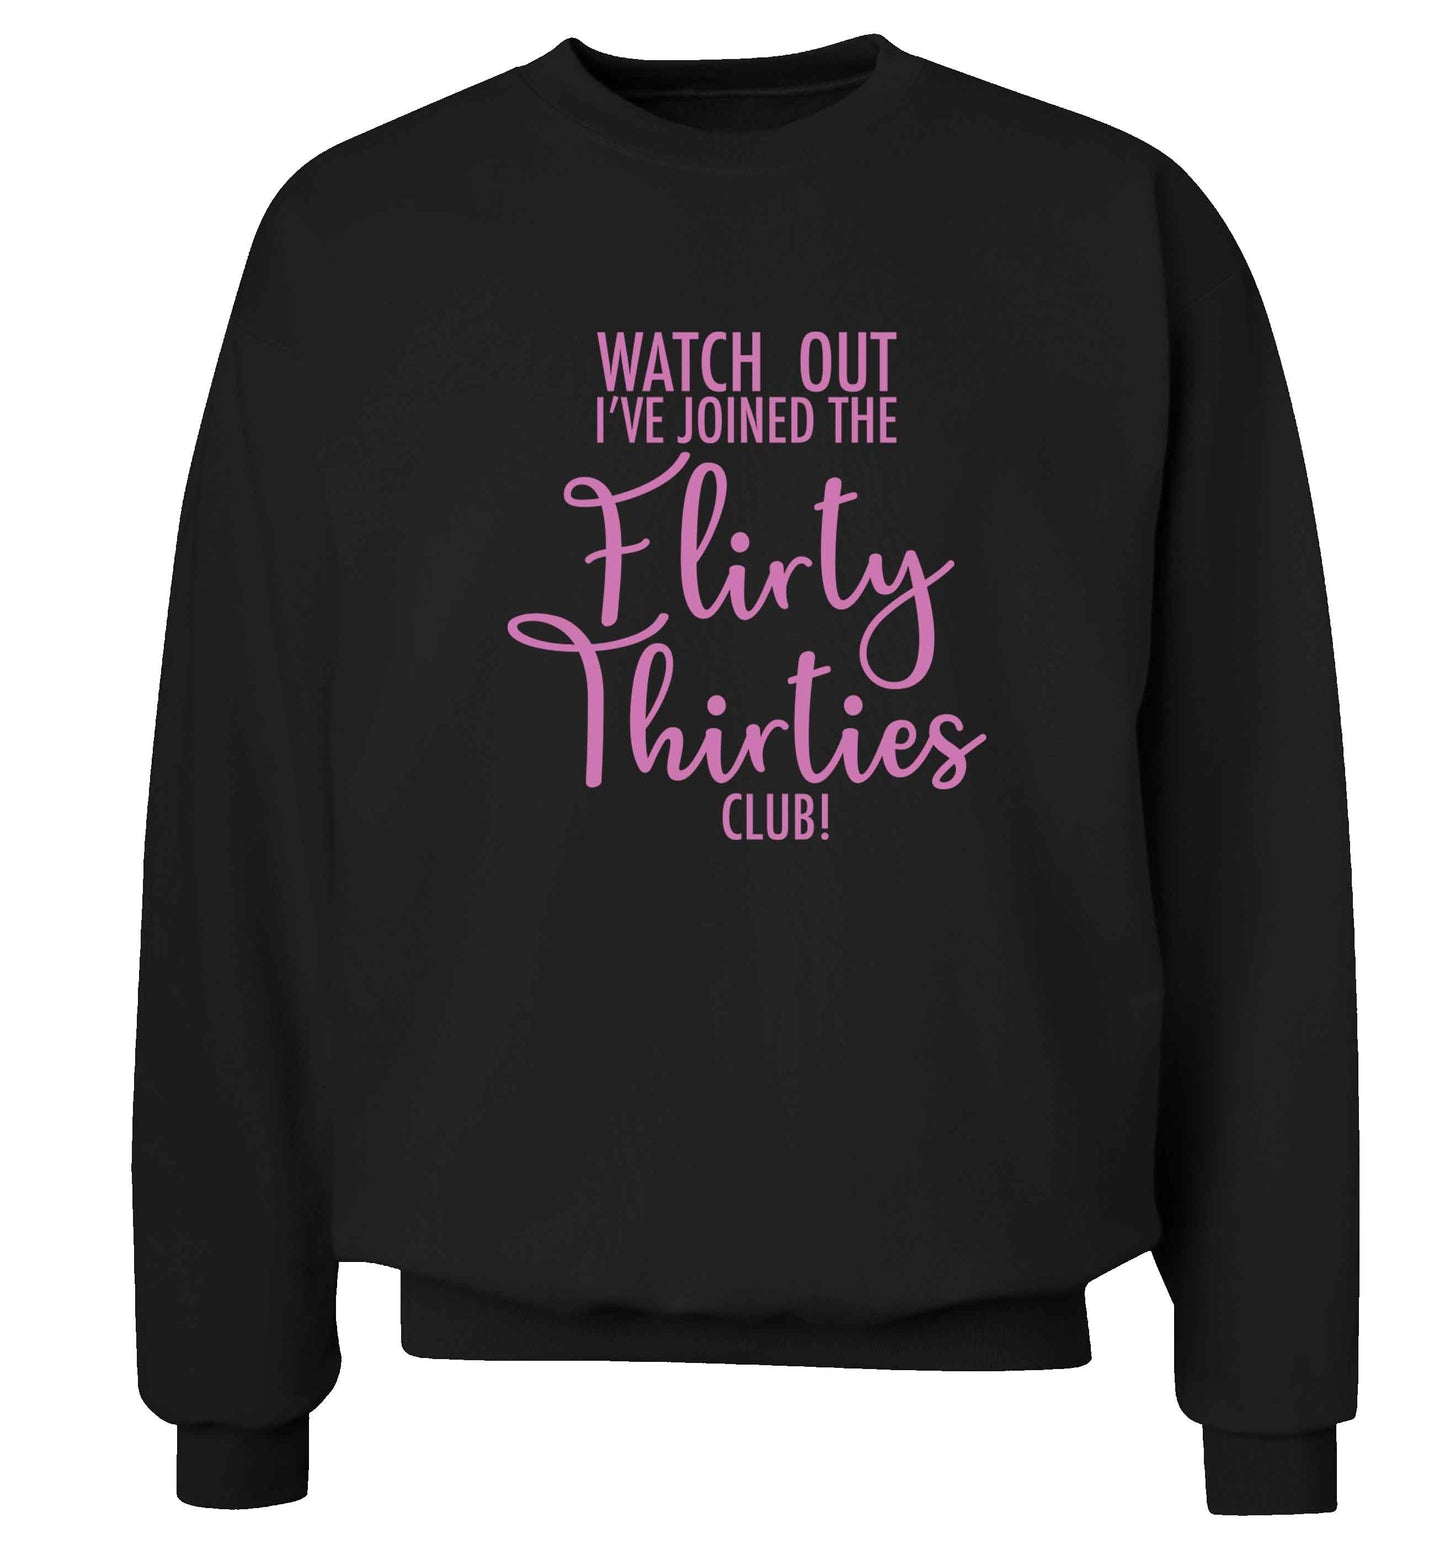 Watch out I've joined the flirty thirties club adult's unisex black sweater 2XL